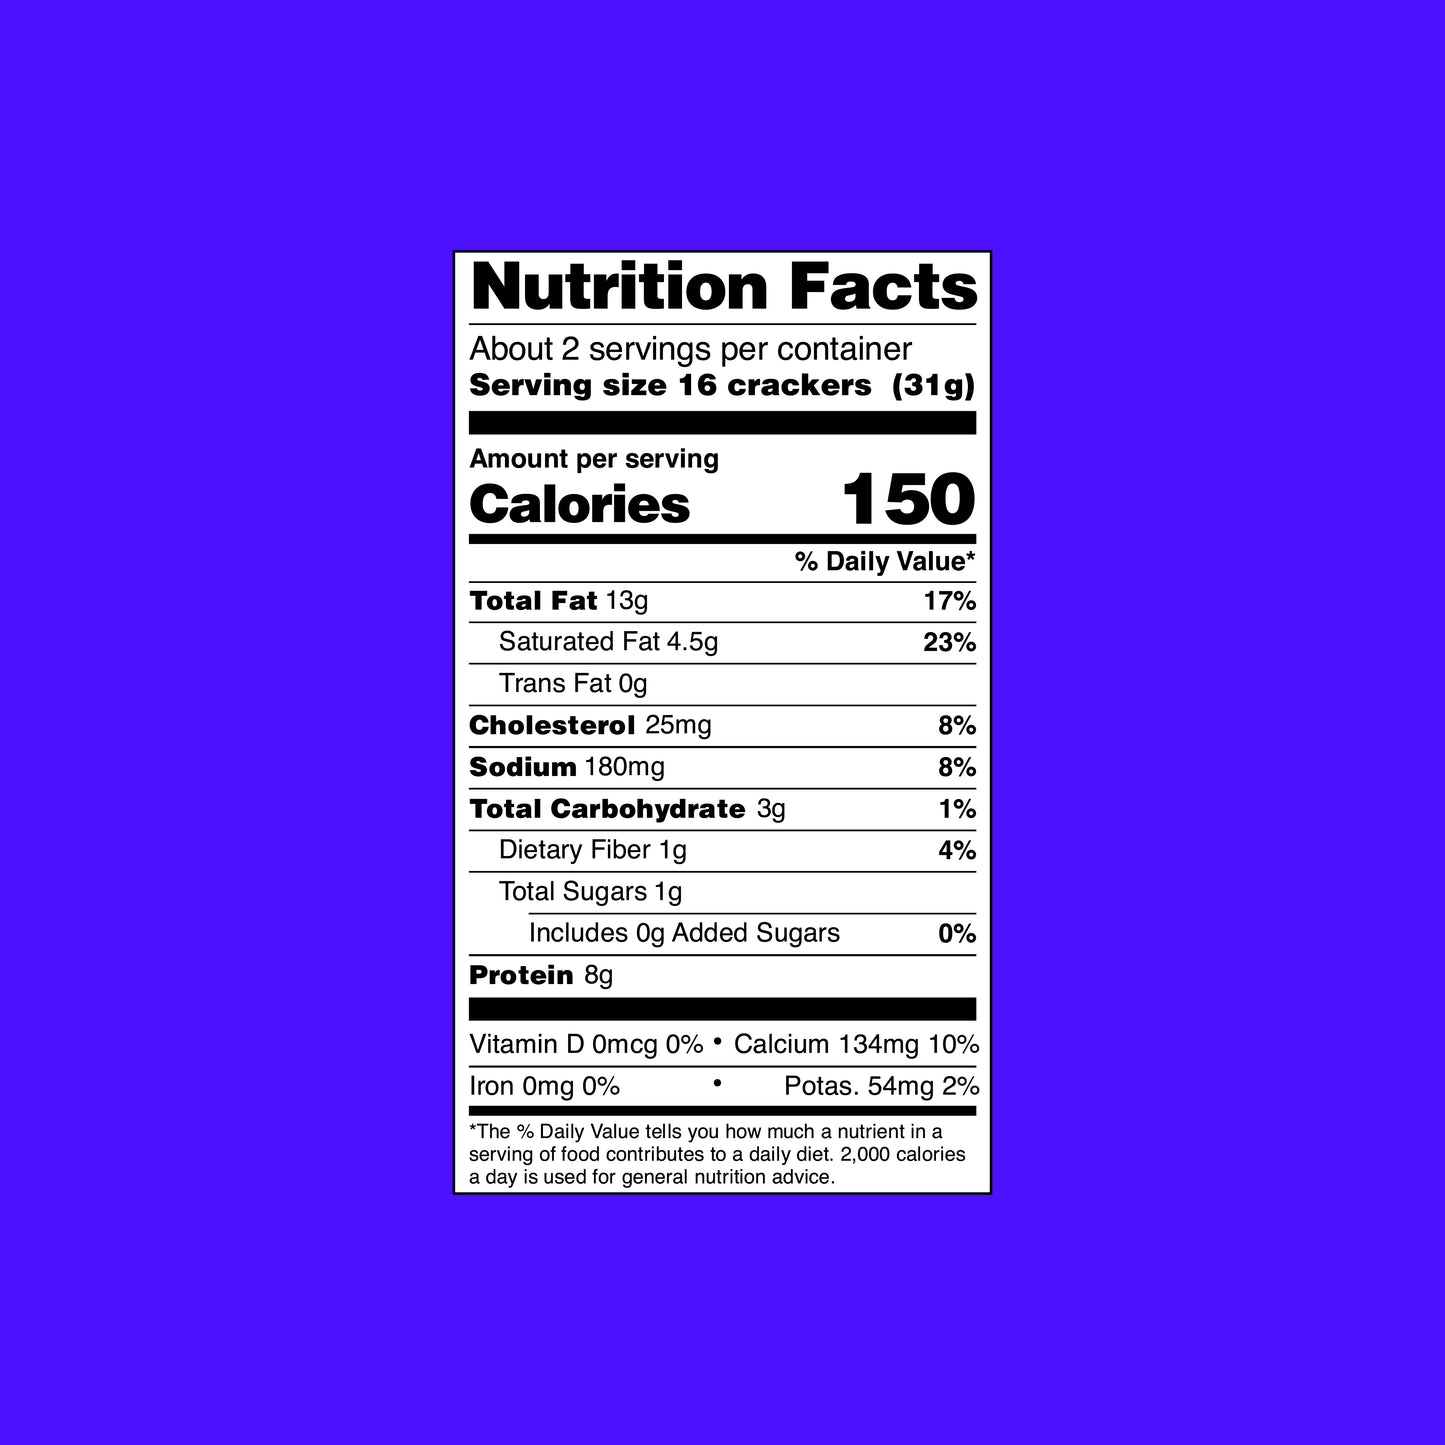 Nutrition facts. About 2 servings per container. Serving size 16 crackers (31g). Amount per serving. 150 Calories. Total fat 13g, 17% daily value. Saturate fat 4.5g, 23% daily value. Trans far 0g. Cholesterol 25mg, 8% daily value. Sodium 180mg, 8% daily value. Total carbohydrate 3g, 1% daily value. Dietary fiber 1g, 4% daily value. Total sugars 1g includes 0g added sugars, 0% daily value. Protein 8g. Vitamin D 0mcg 0%, Calcium 134mg 10%, iron 0mg 0%, Potas. 54mg 2%.